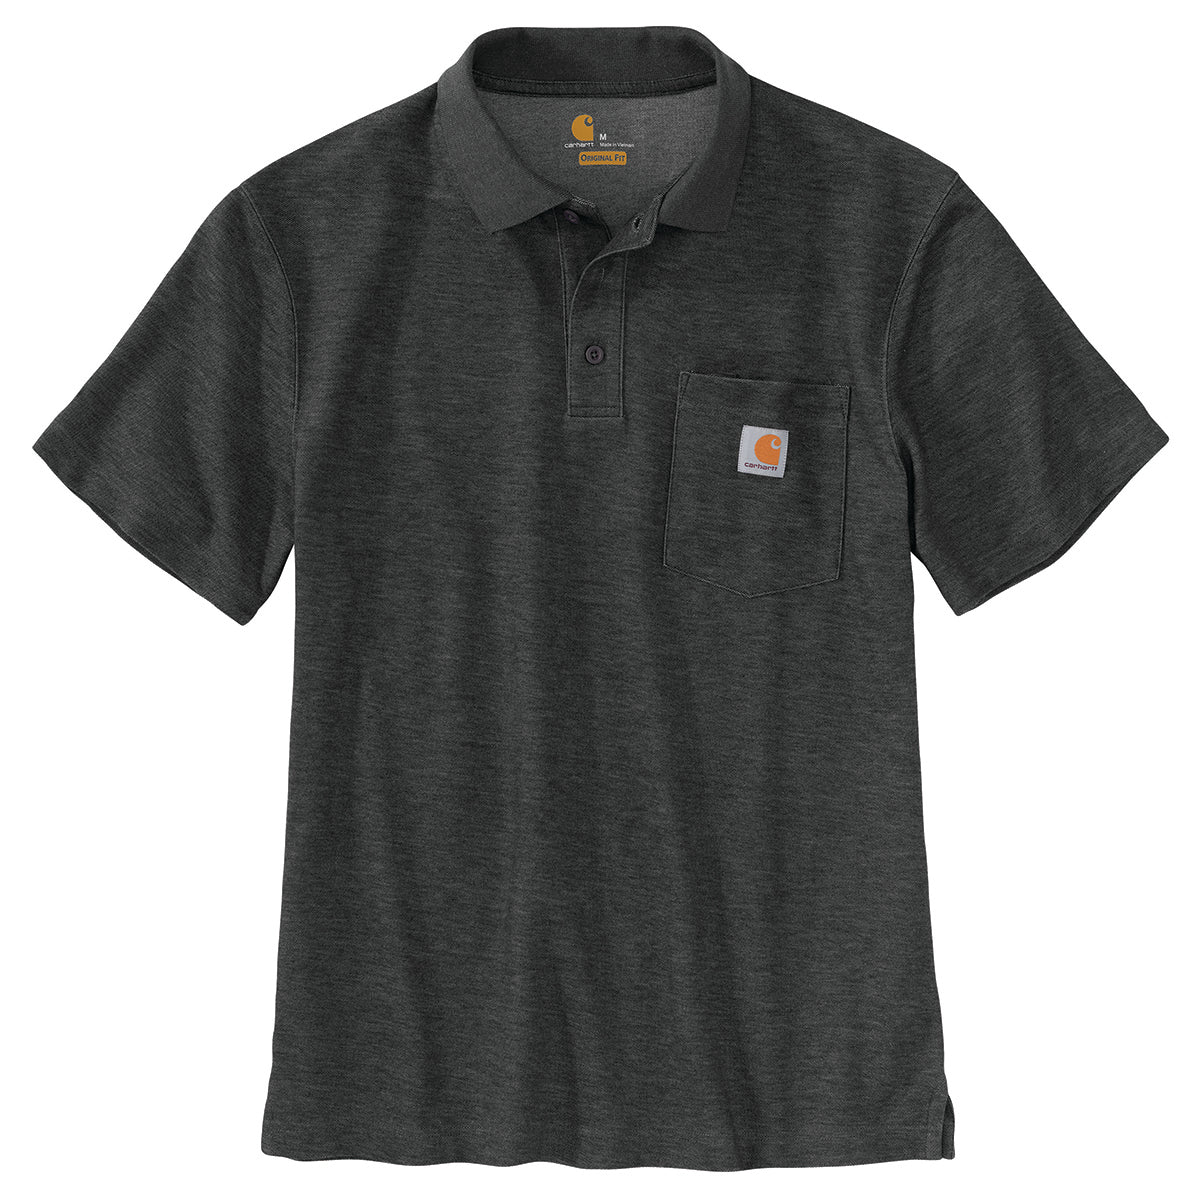 K570 - Loose Fit Midweight Short-Sleeve Pocket Polo